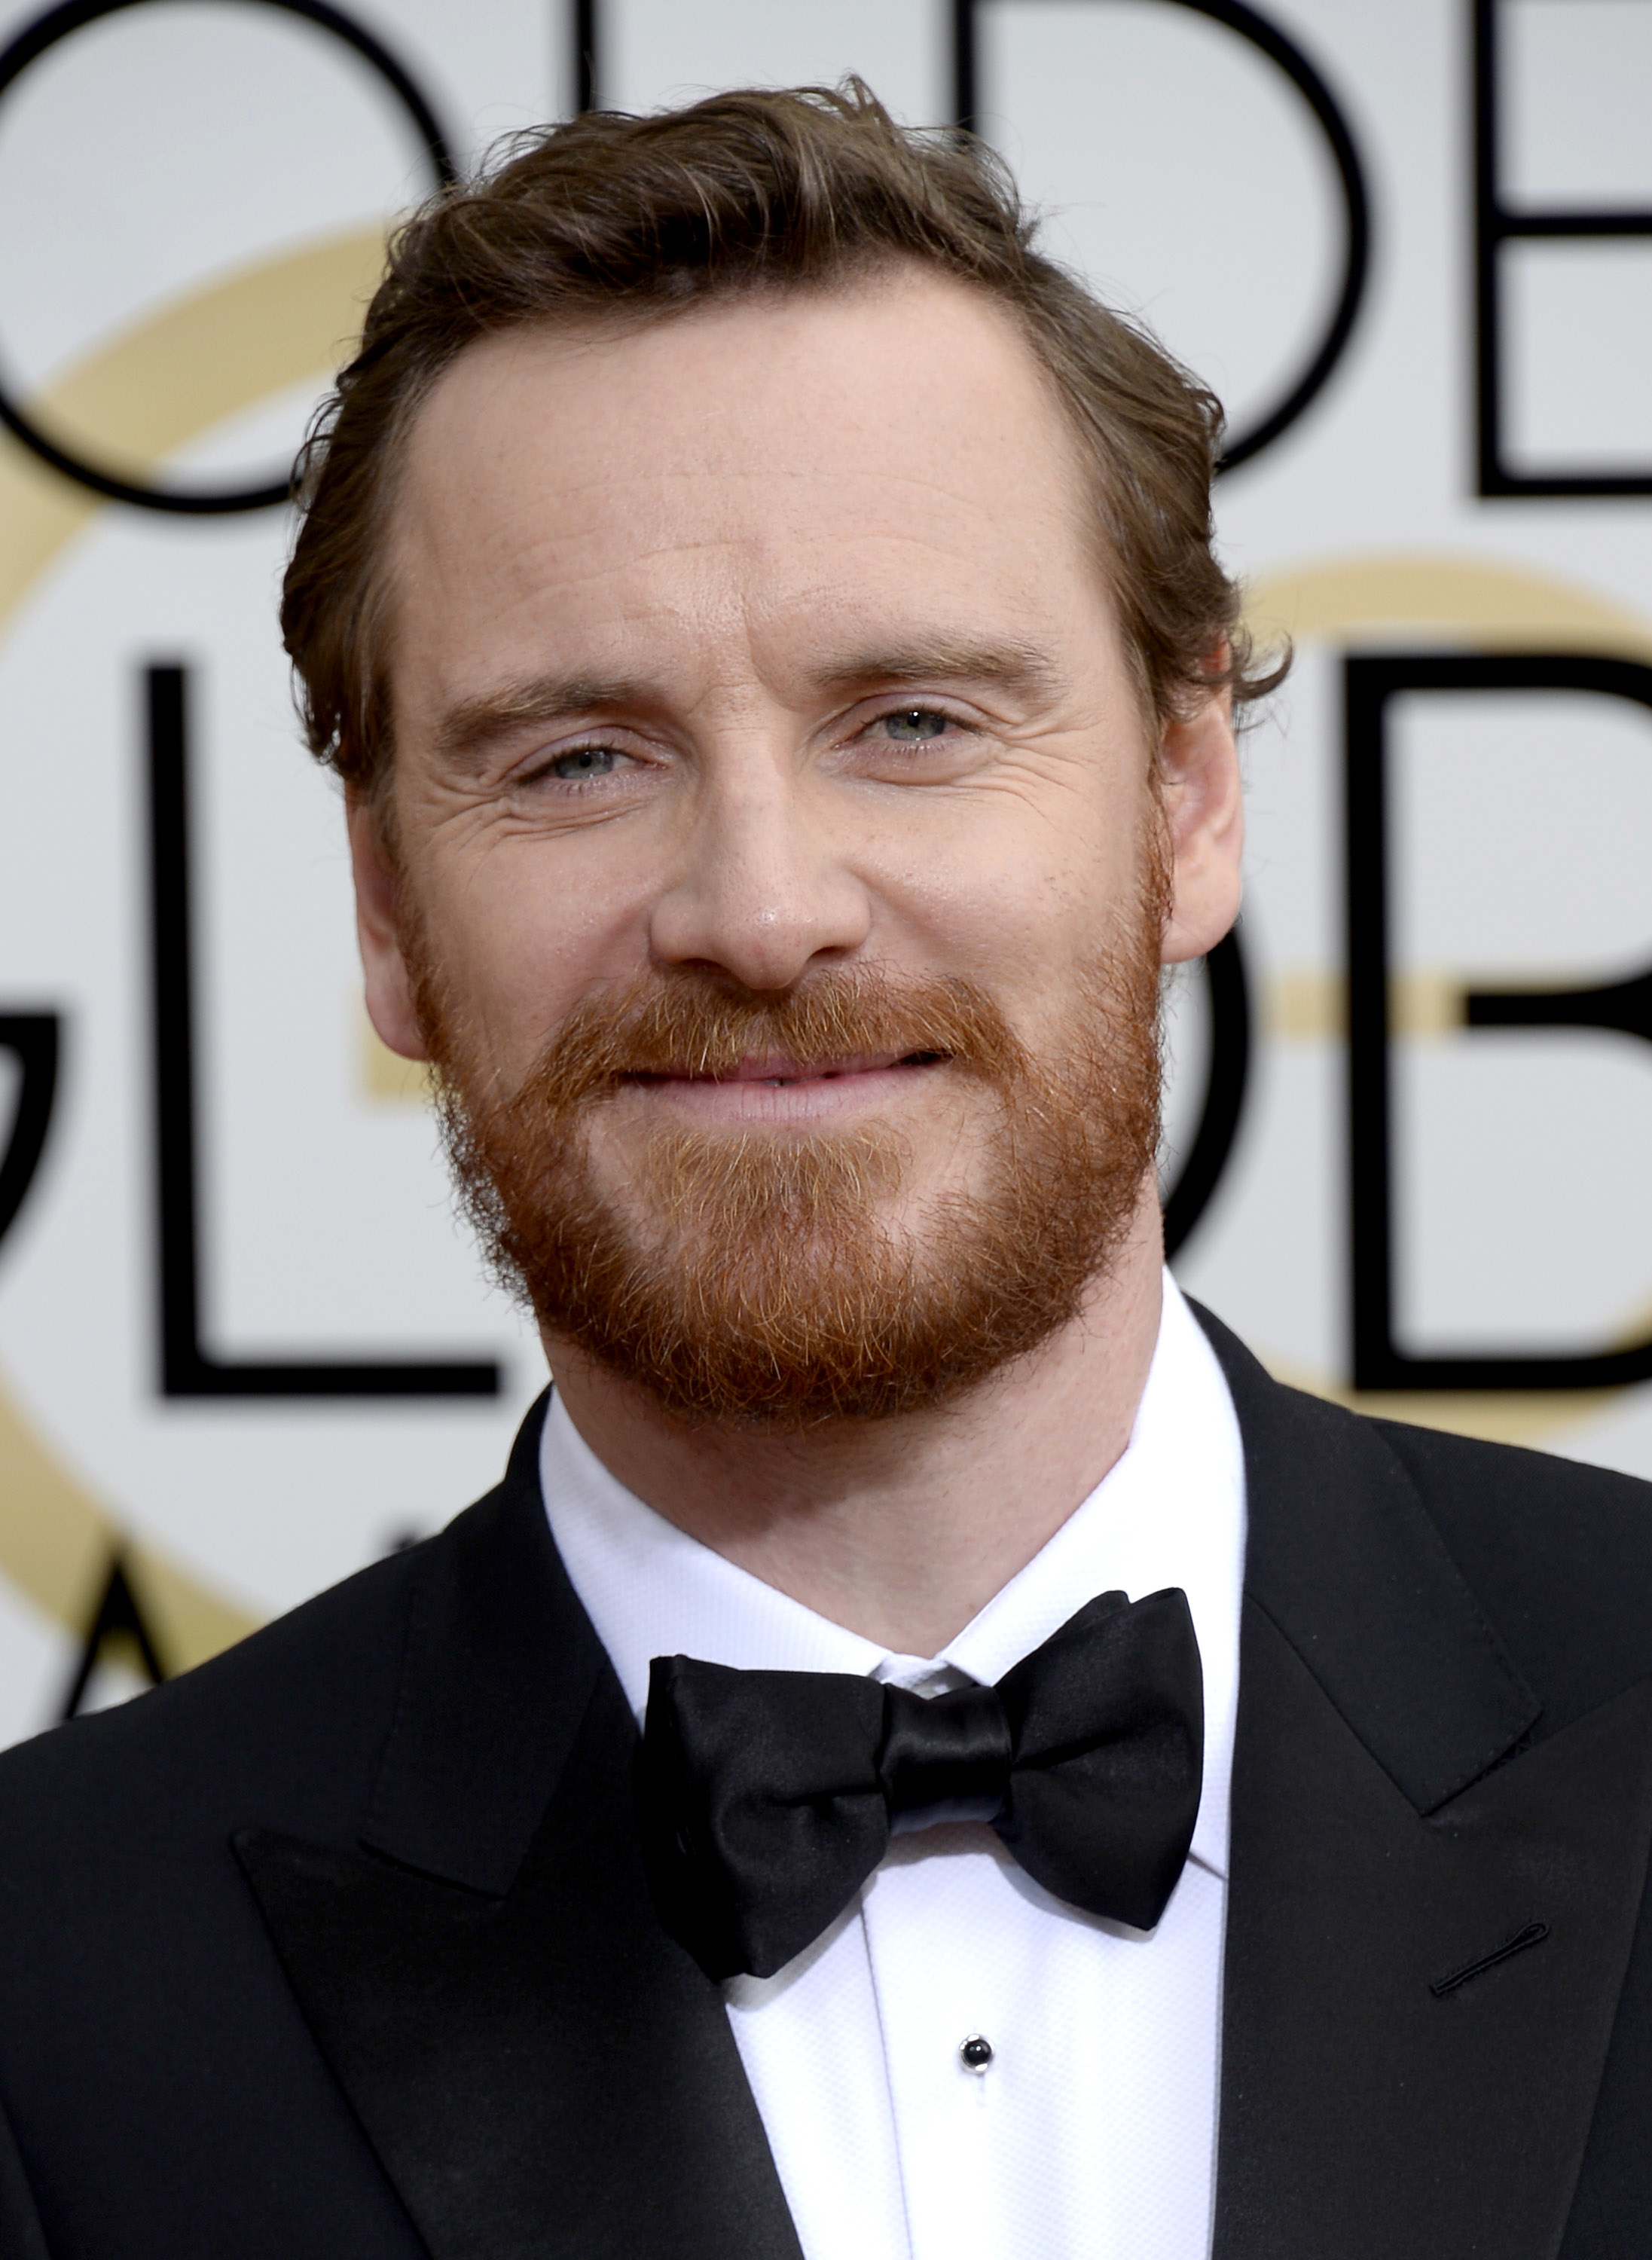 Closeup of Michael Fassbender on the red carpet in a tuxedo